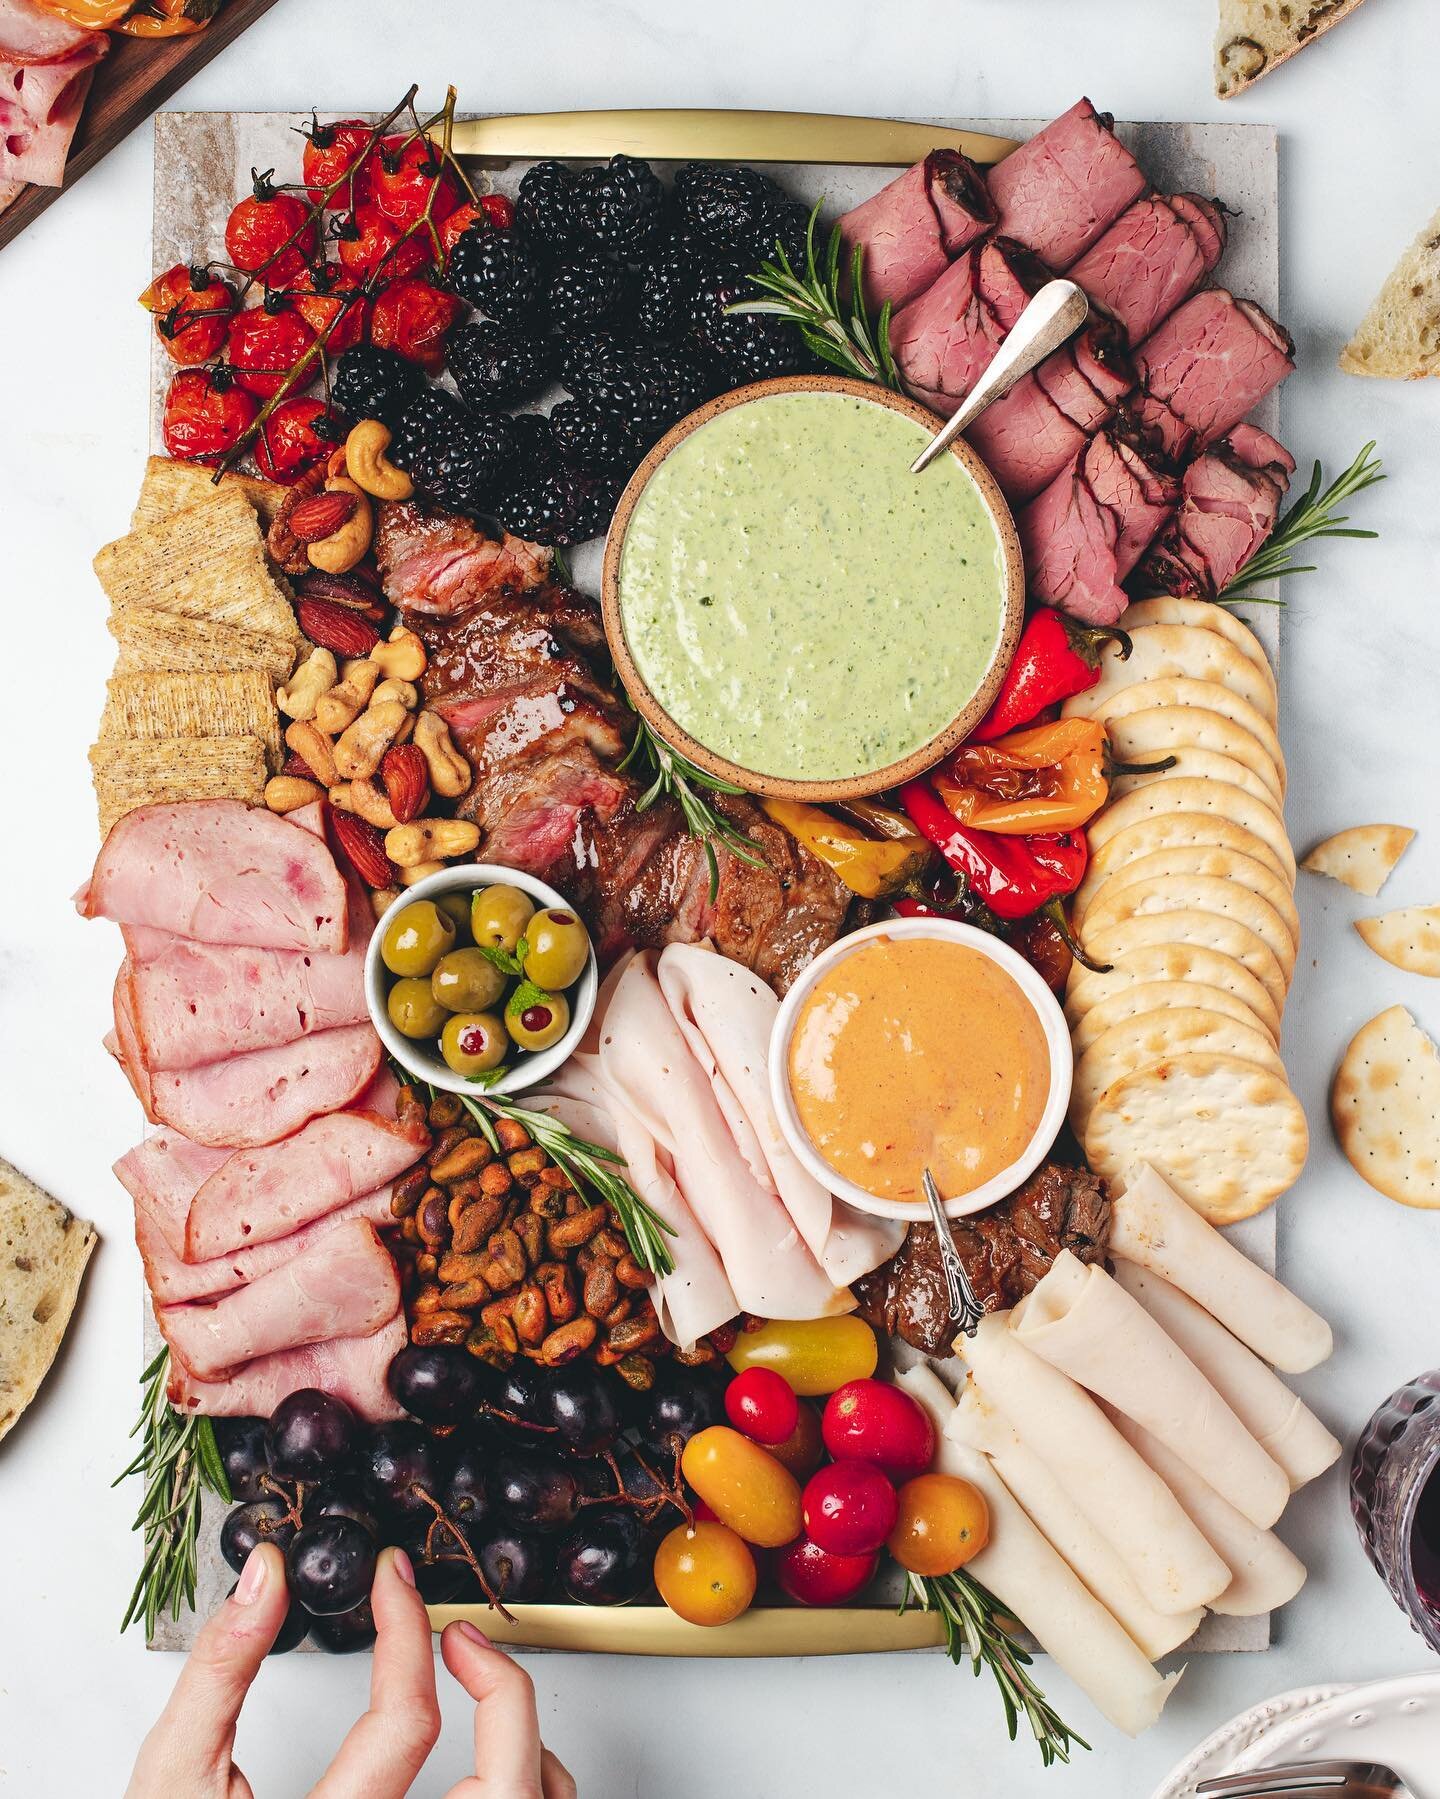 Building charcuterie boards is one of my favorite things to style and shoot!
⁣
So here is a sneak peak from the cookbook with @elizabeth_simplyagave and @dralyssadberlin , As I&rsquo;m drowning in all the editing 😅 and catching up on my school work.